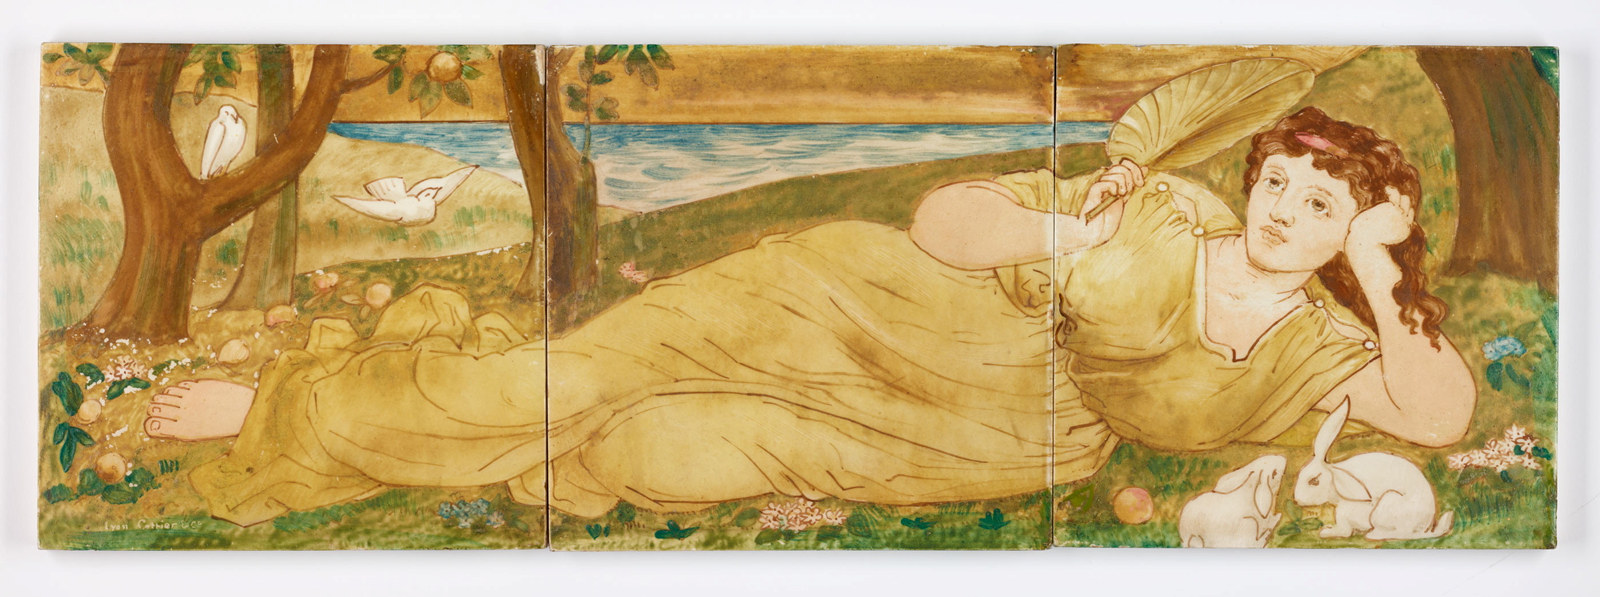 Panel of three ceramic tiles with handpainted decoration of a reclining woman